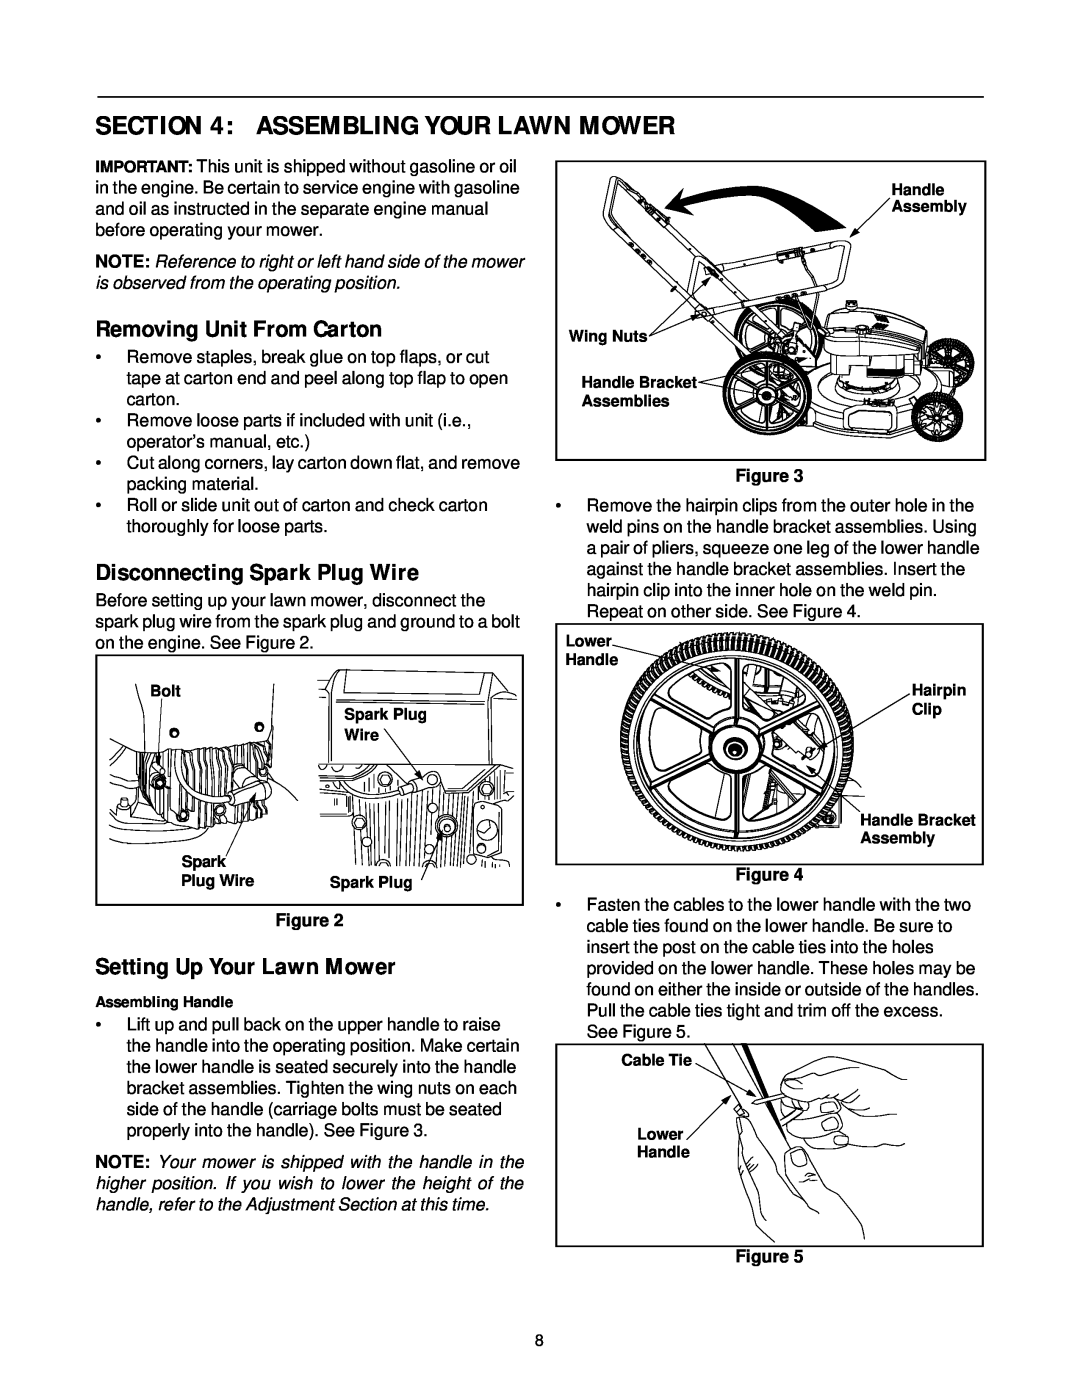 Yard Machines 509 Assembling Your Lawn Mower, Removing Unit From Carton, Disconnecting Spark Plug Wire, Assembling Handle 